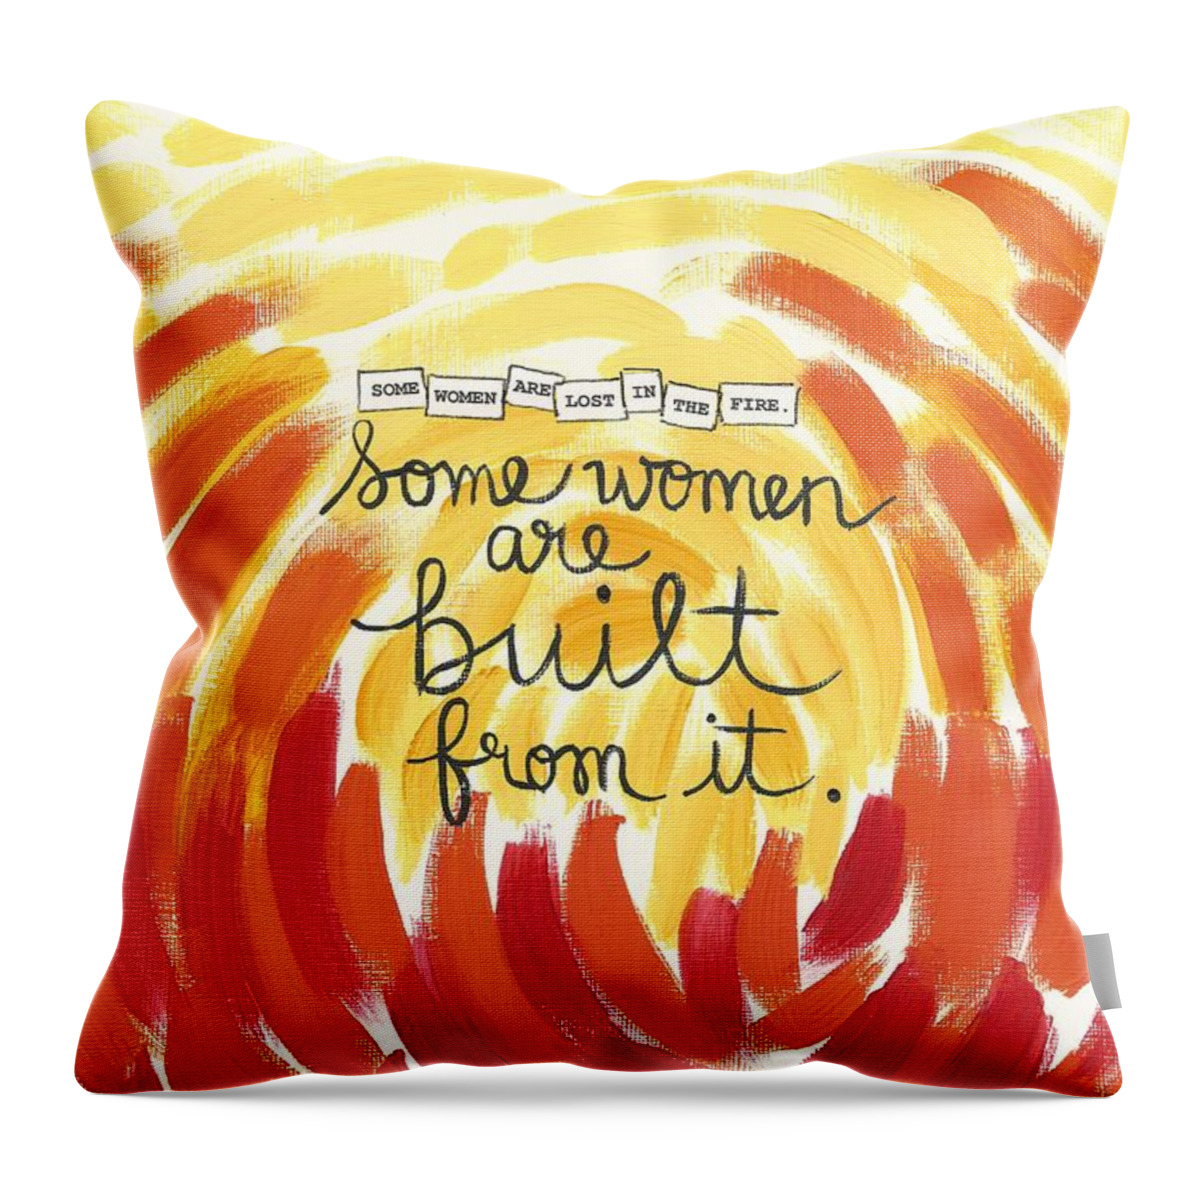 Mixed Media Throw Pillow featuring the painting Some women... by Monica Martin